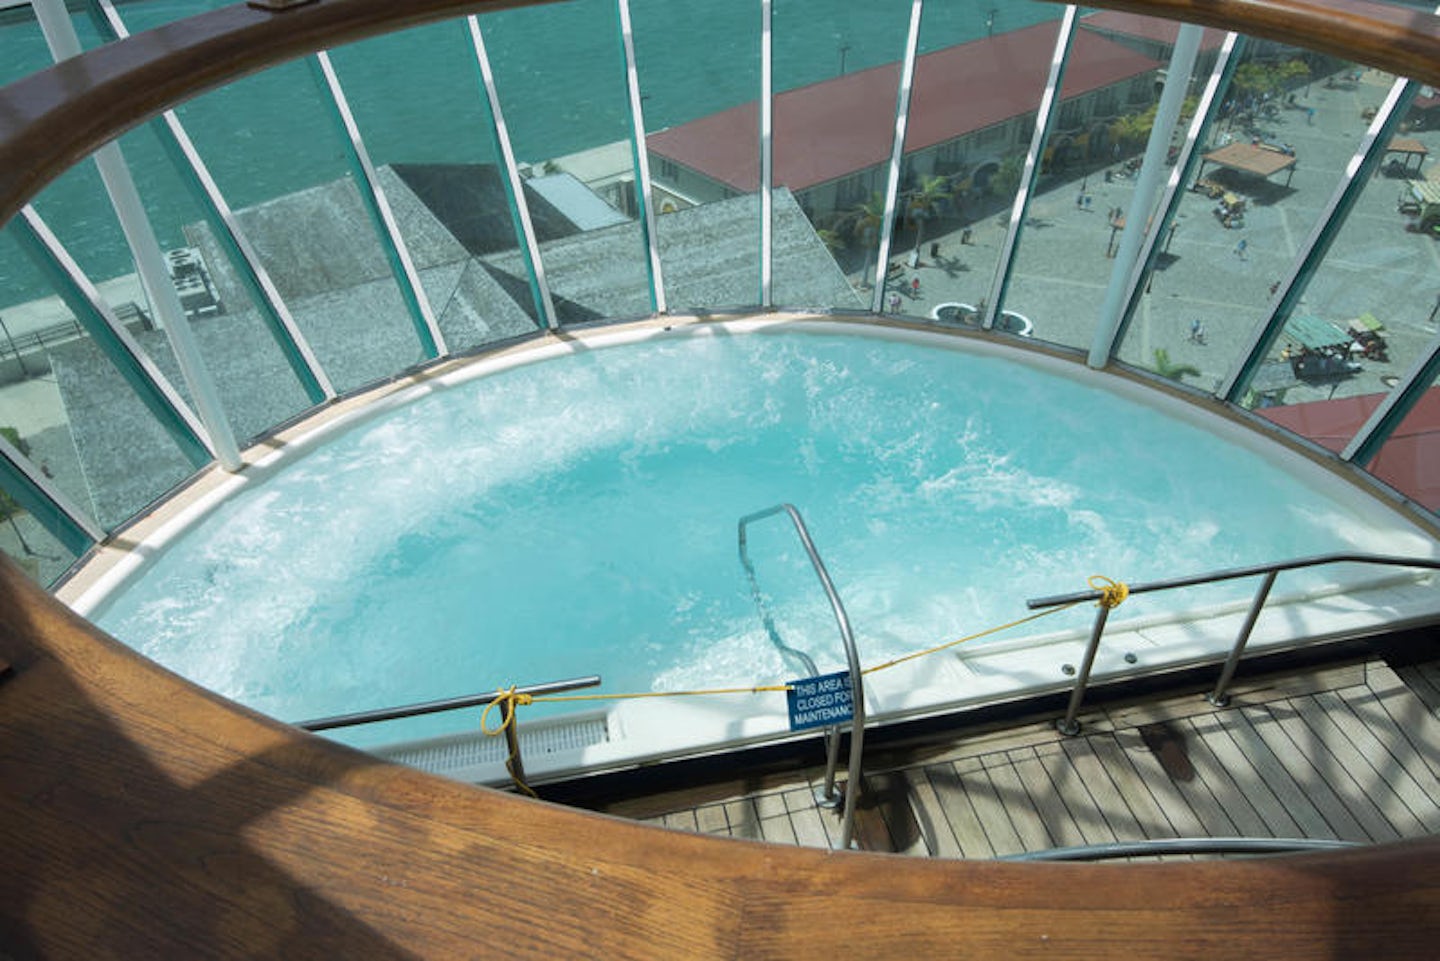 The Whirlpools on Freedom of the Seas